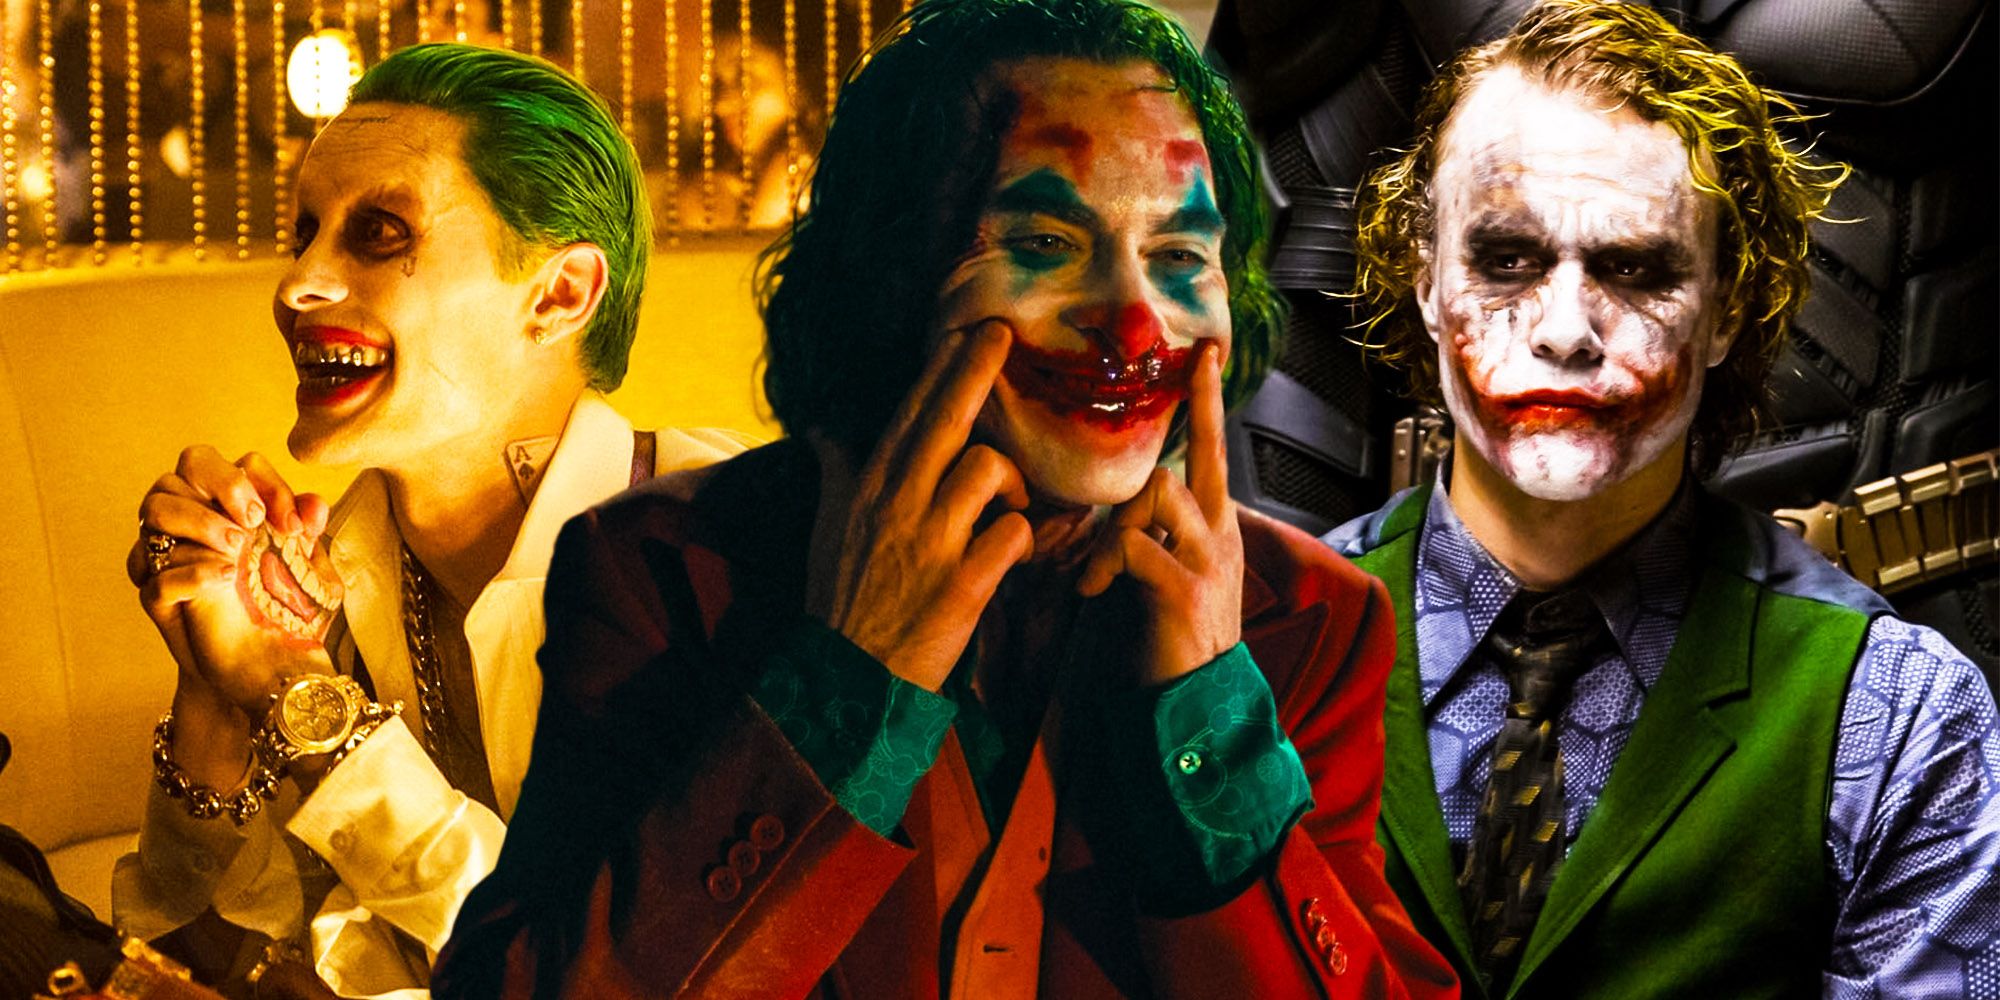 Joaquin makes a smiling face in Joker, Jared Leto smiles candidly in Suicide Squad, and stern Heath Ledger as the Joker in The Dark Knight